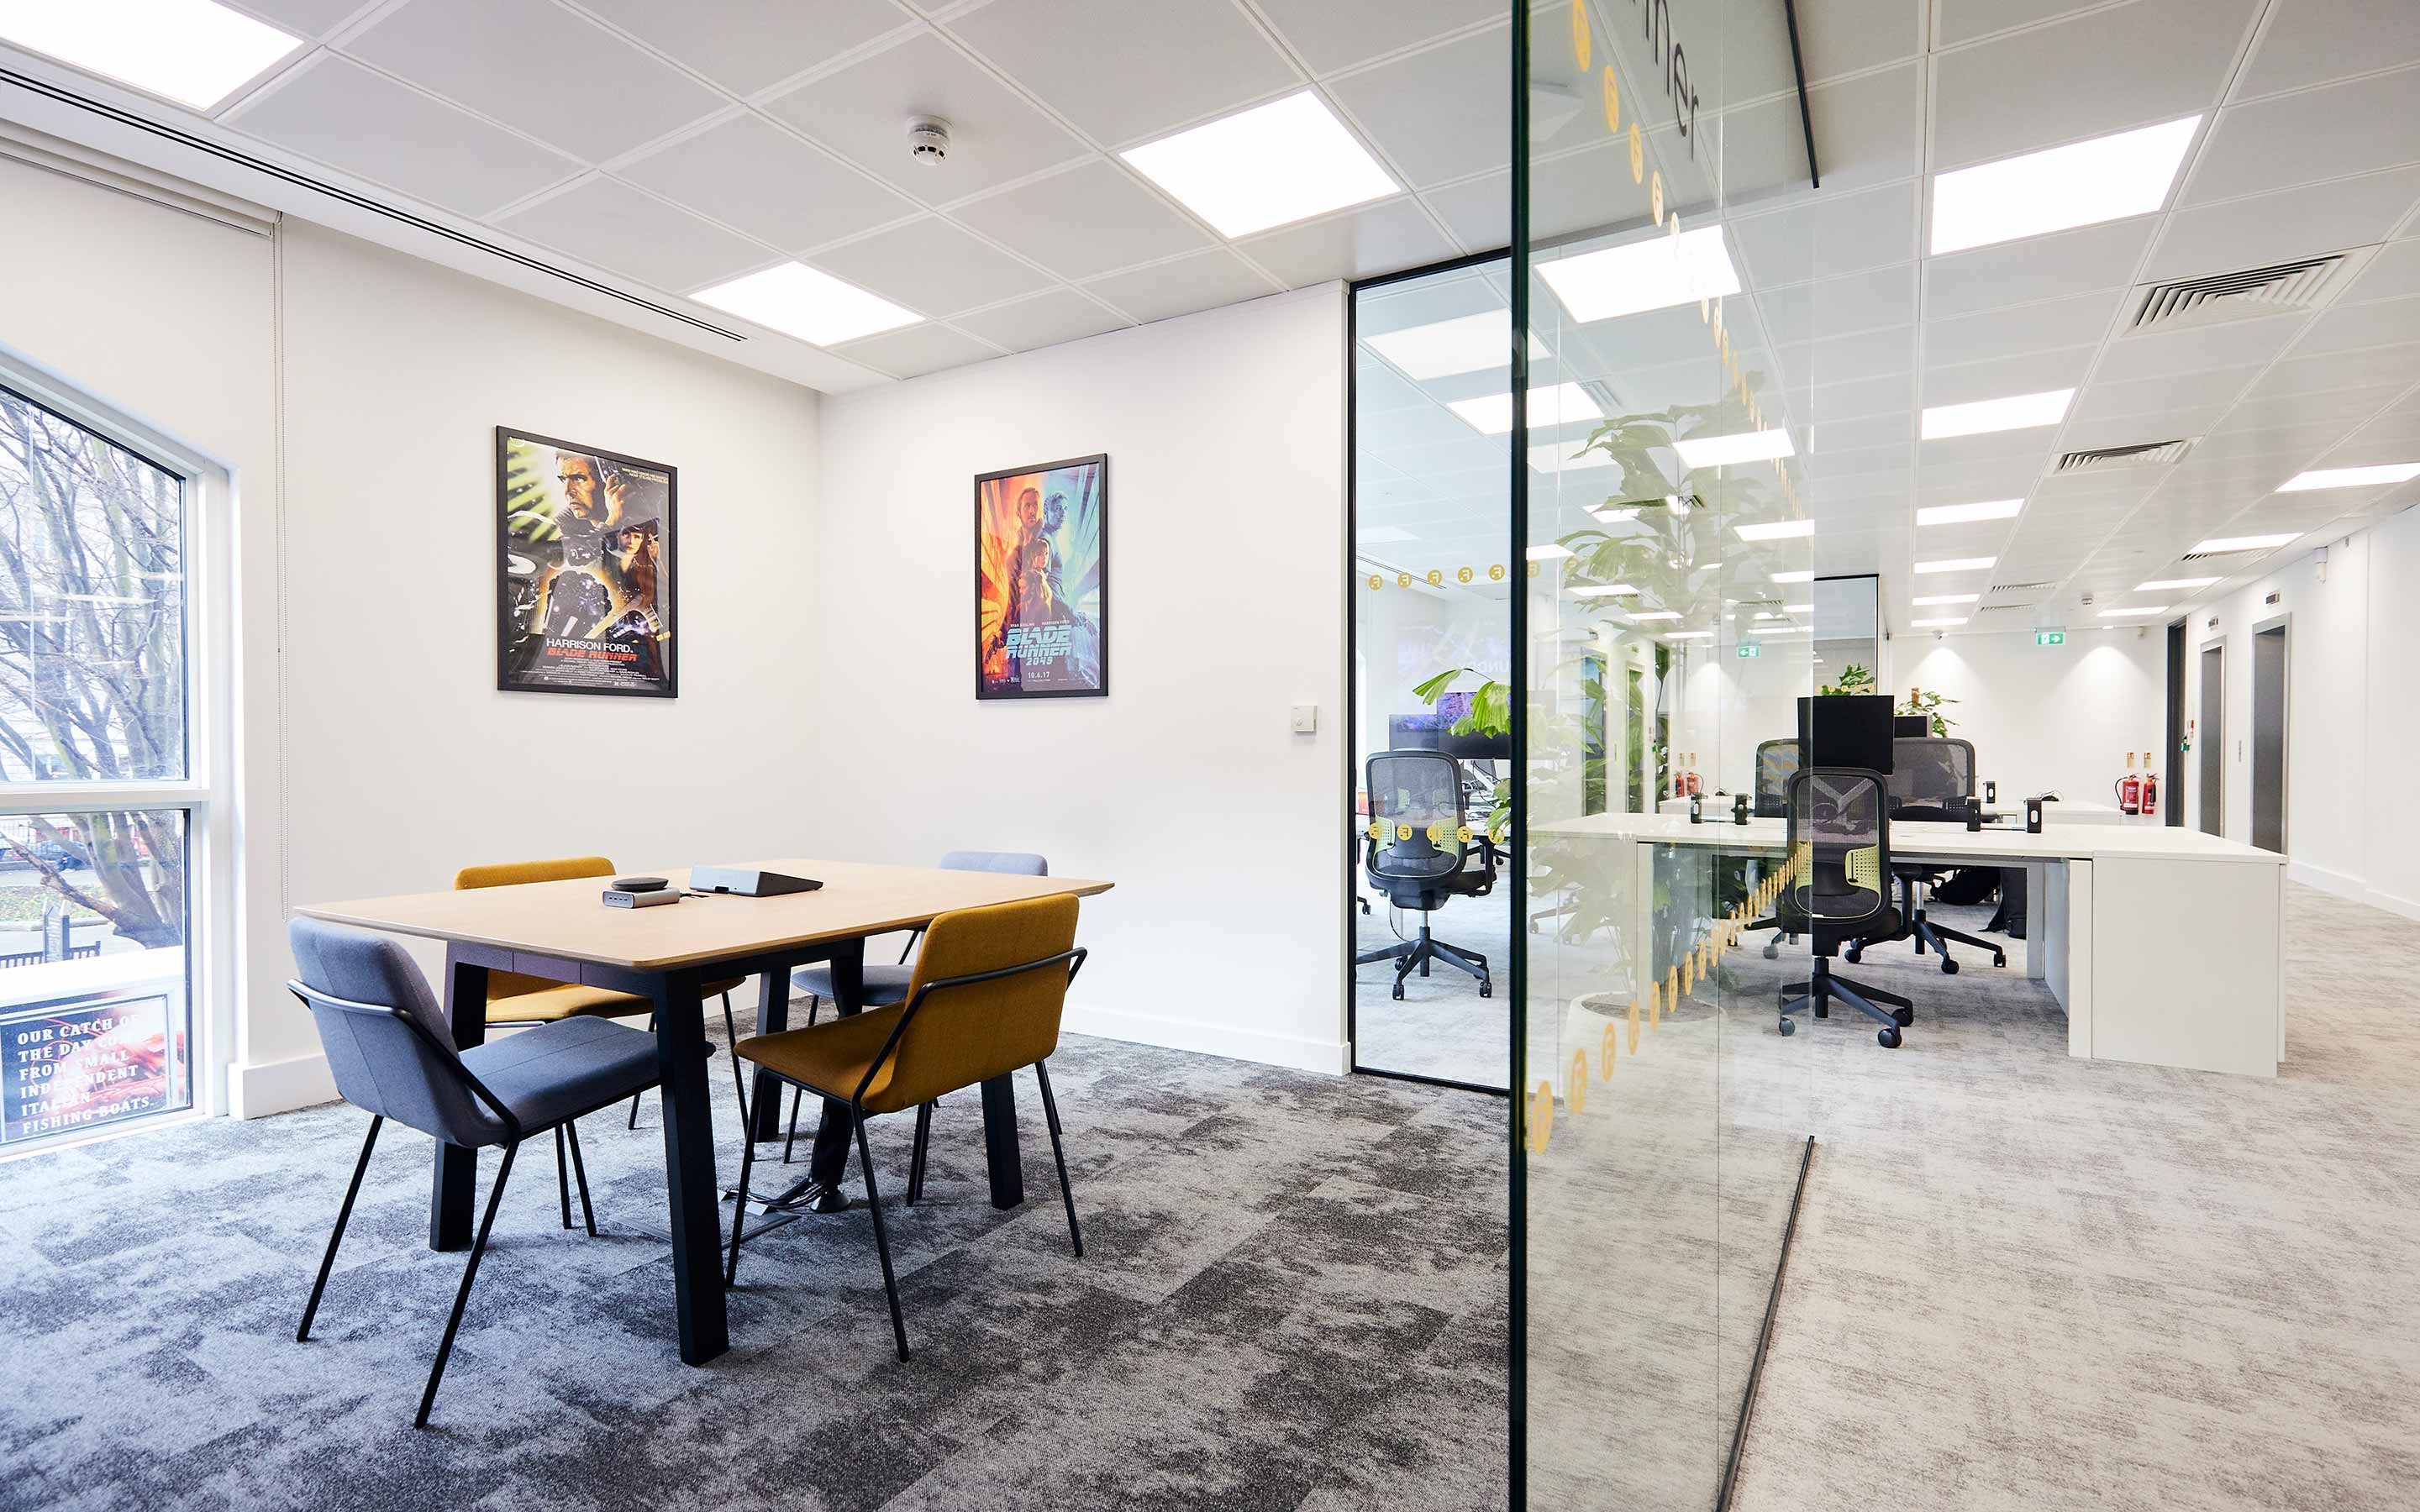 Office interior design showcasing a blend of functionality and aesthetics, promoting creativity and efficiency in the workplace